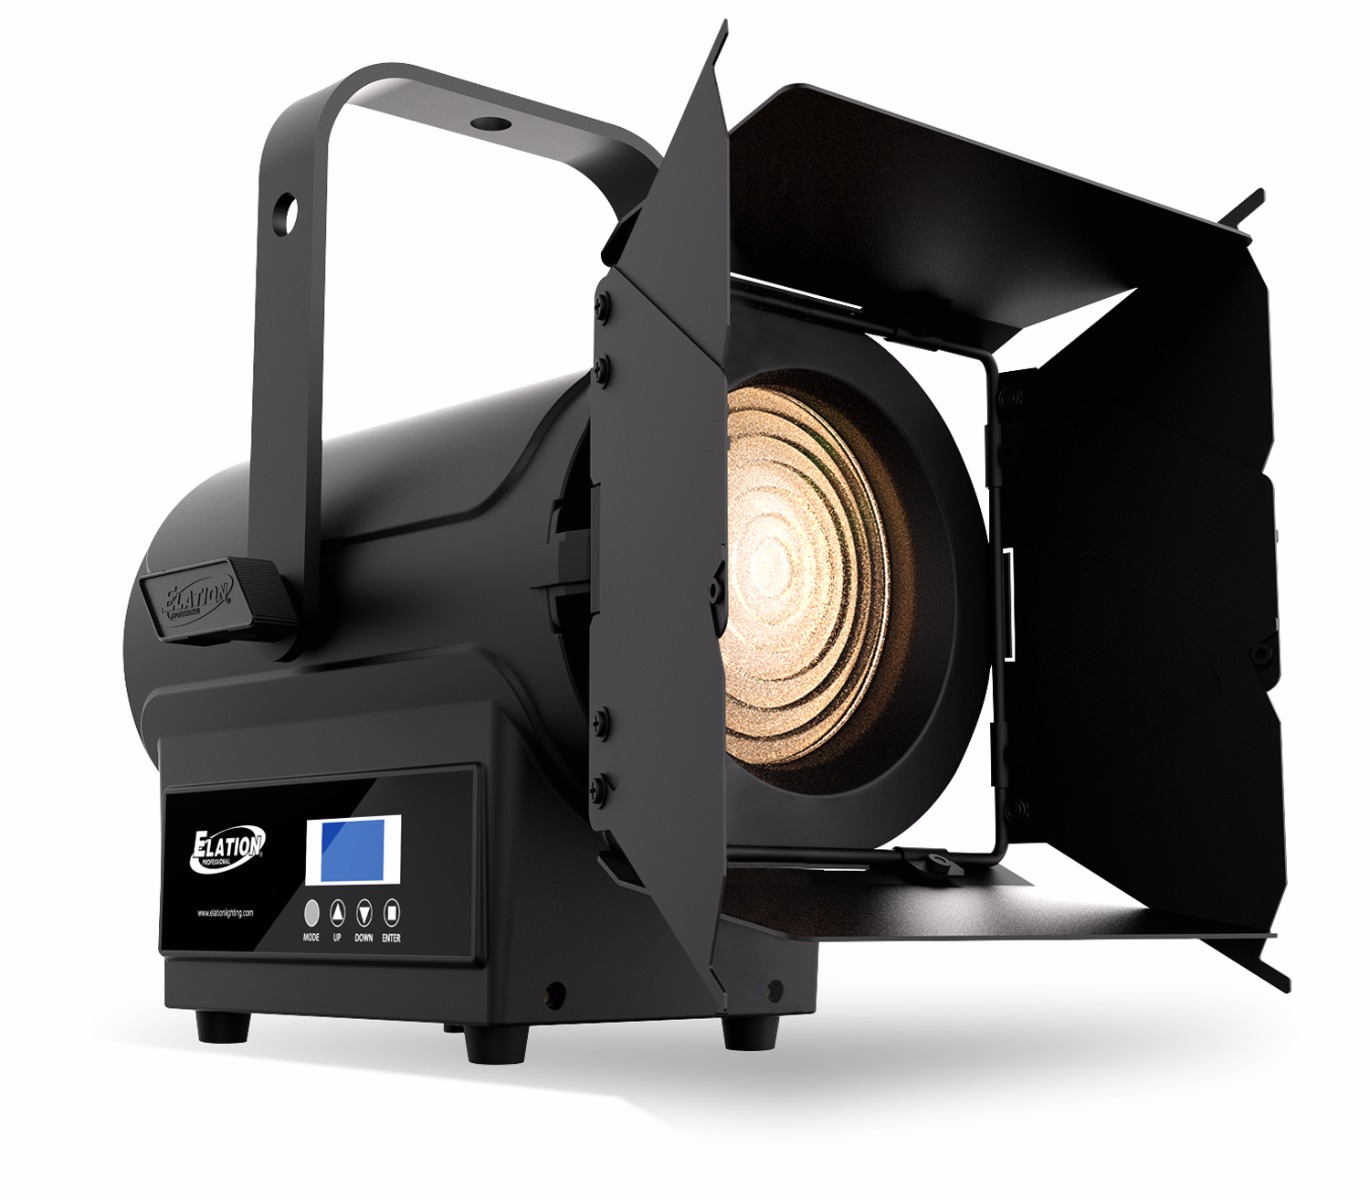 See what all the talk is about at Elation LDI Booth 2315Gallery Image kl fresnel 4 lt 